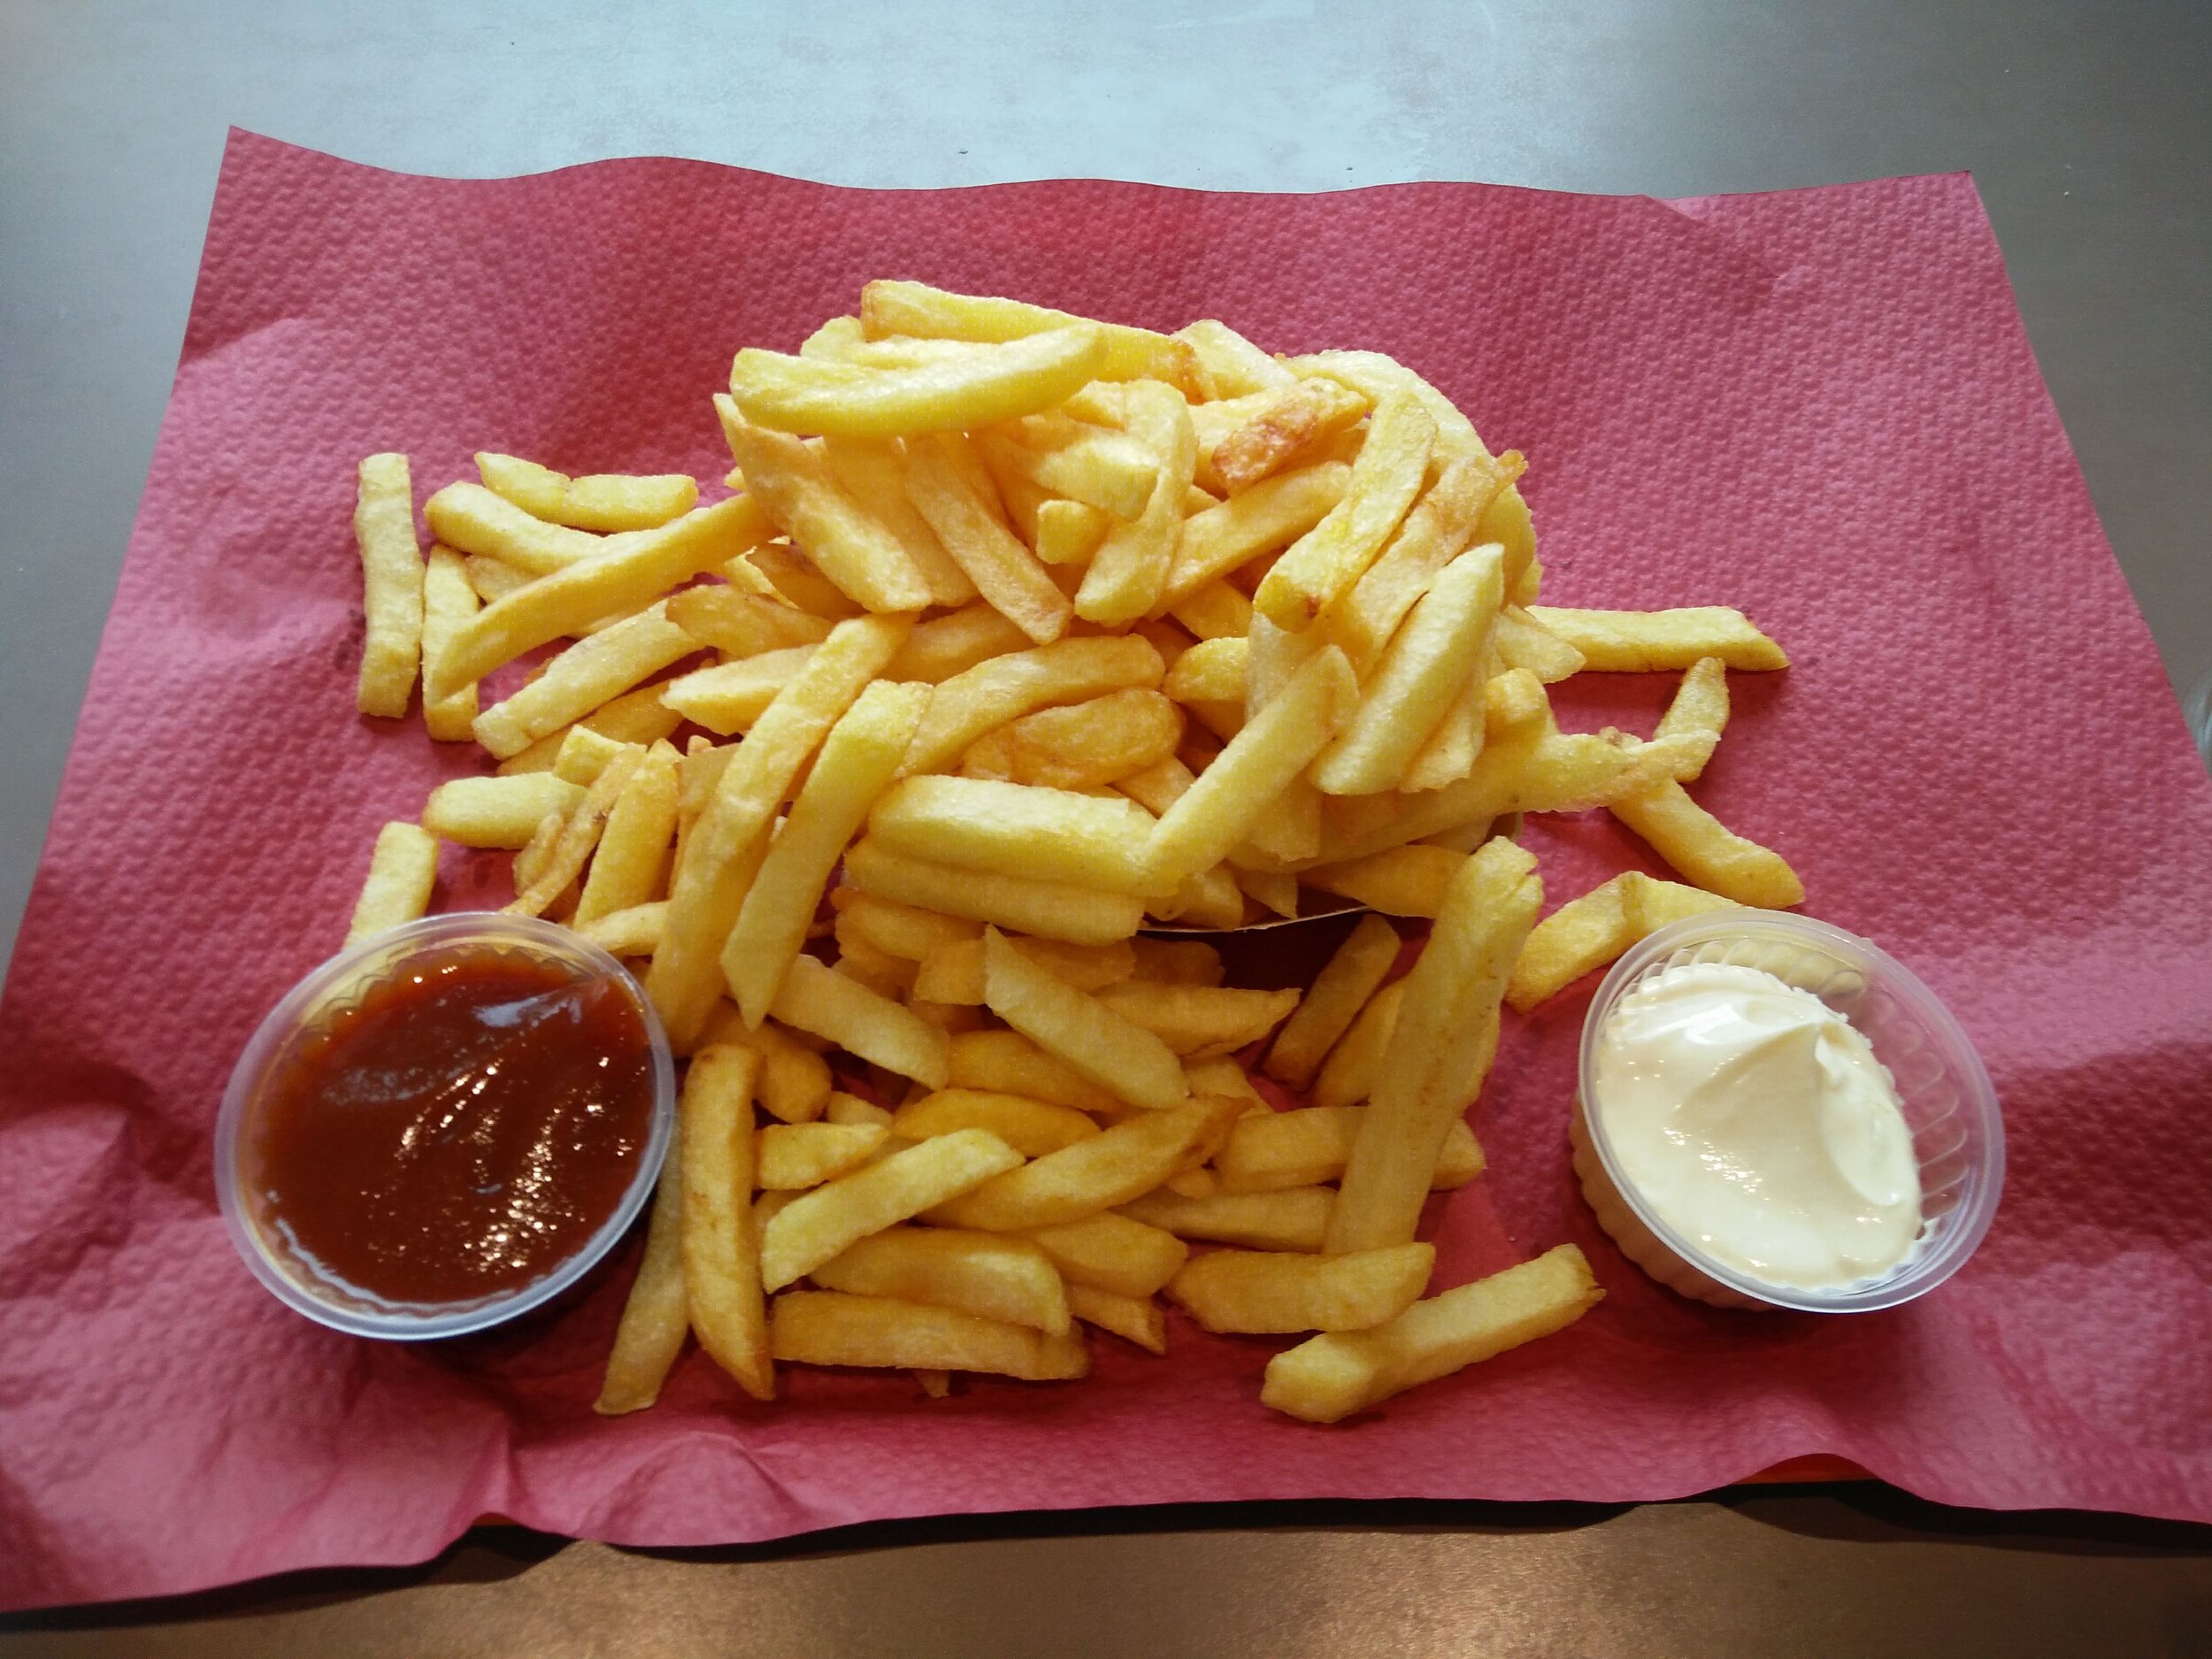  a “Small” order of fries 